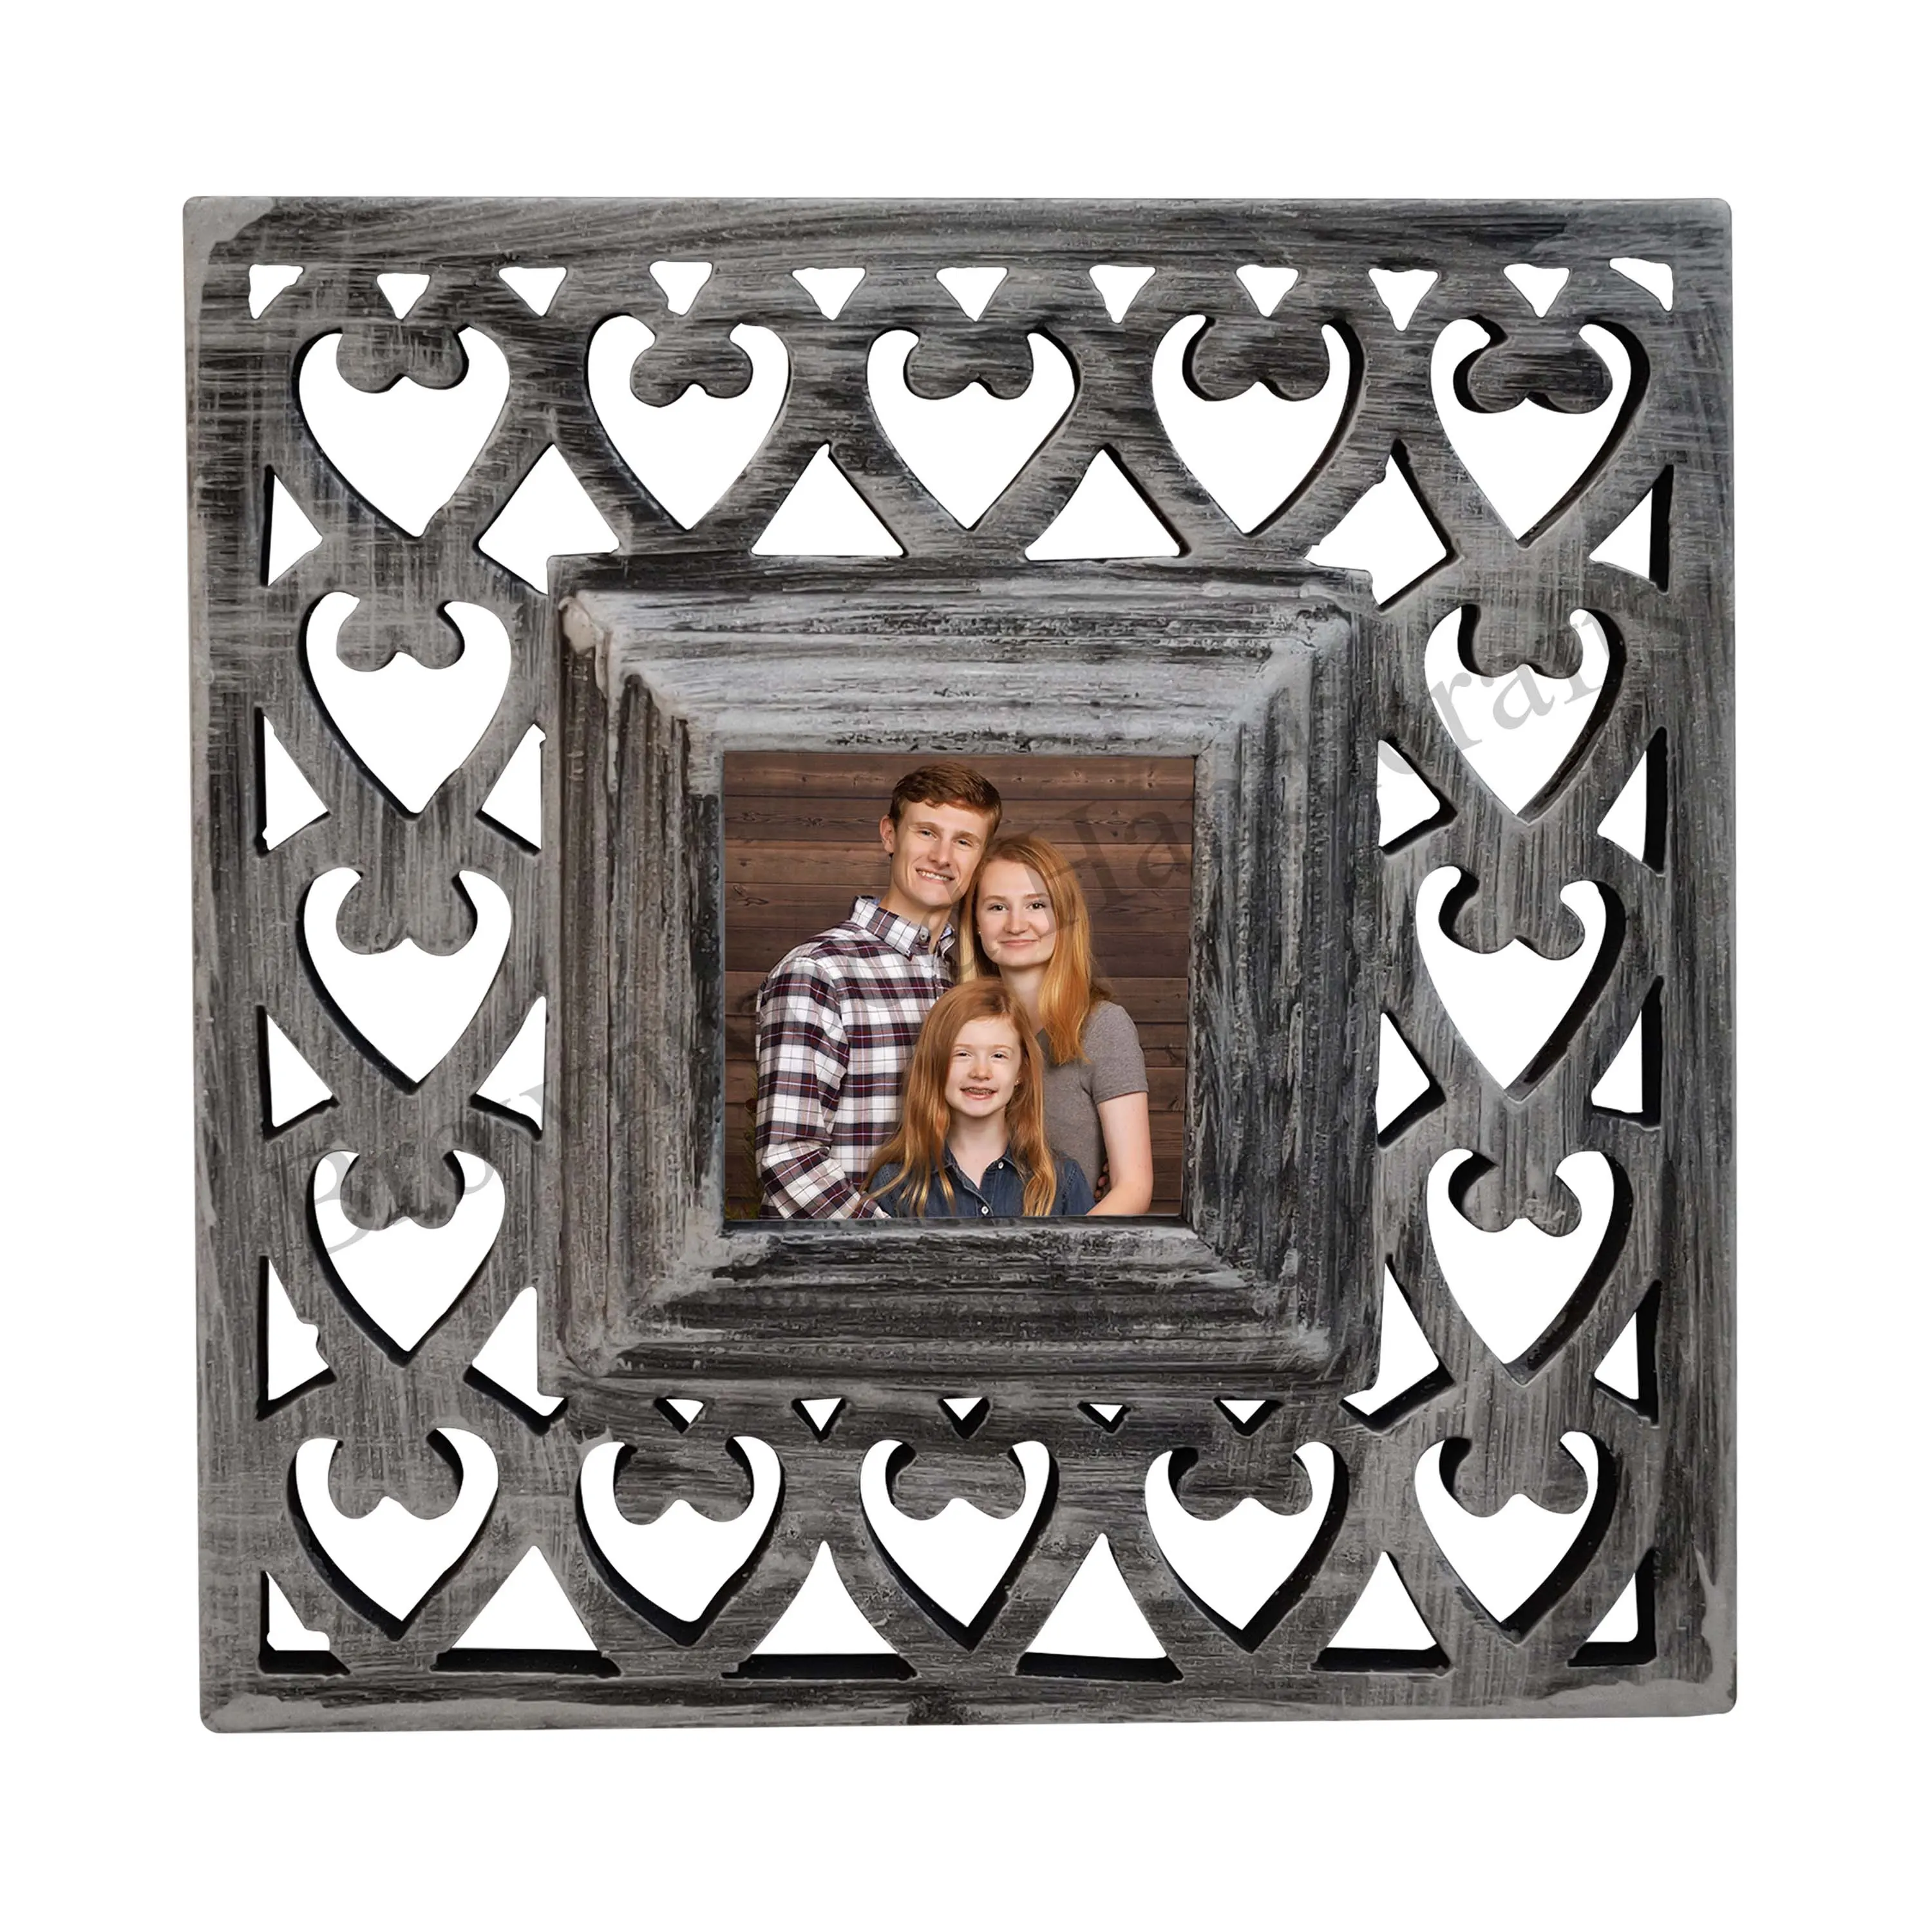 Beautifully Hand Carved MDF Wood Photo Frame to Showcase Precious Memories and Add Elegance in Decor Direct Factory Supply